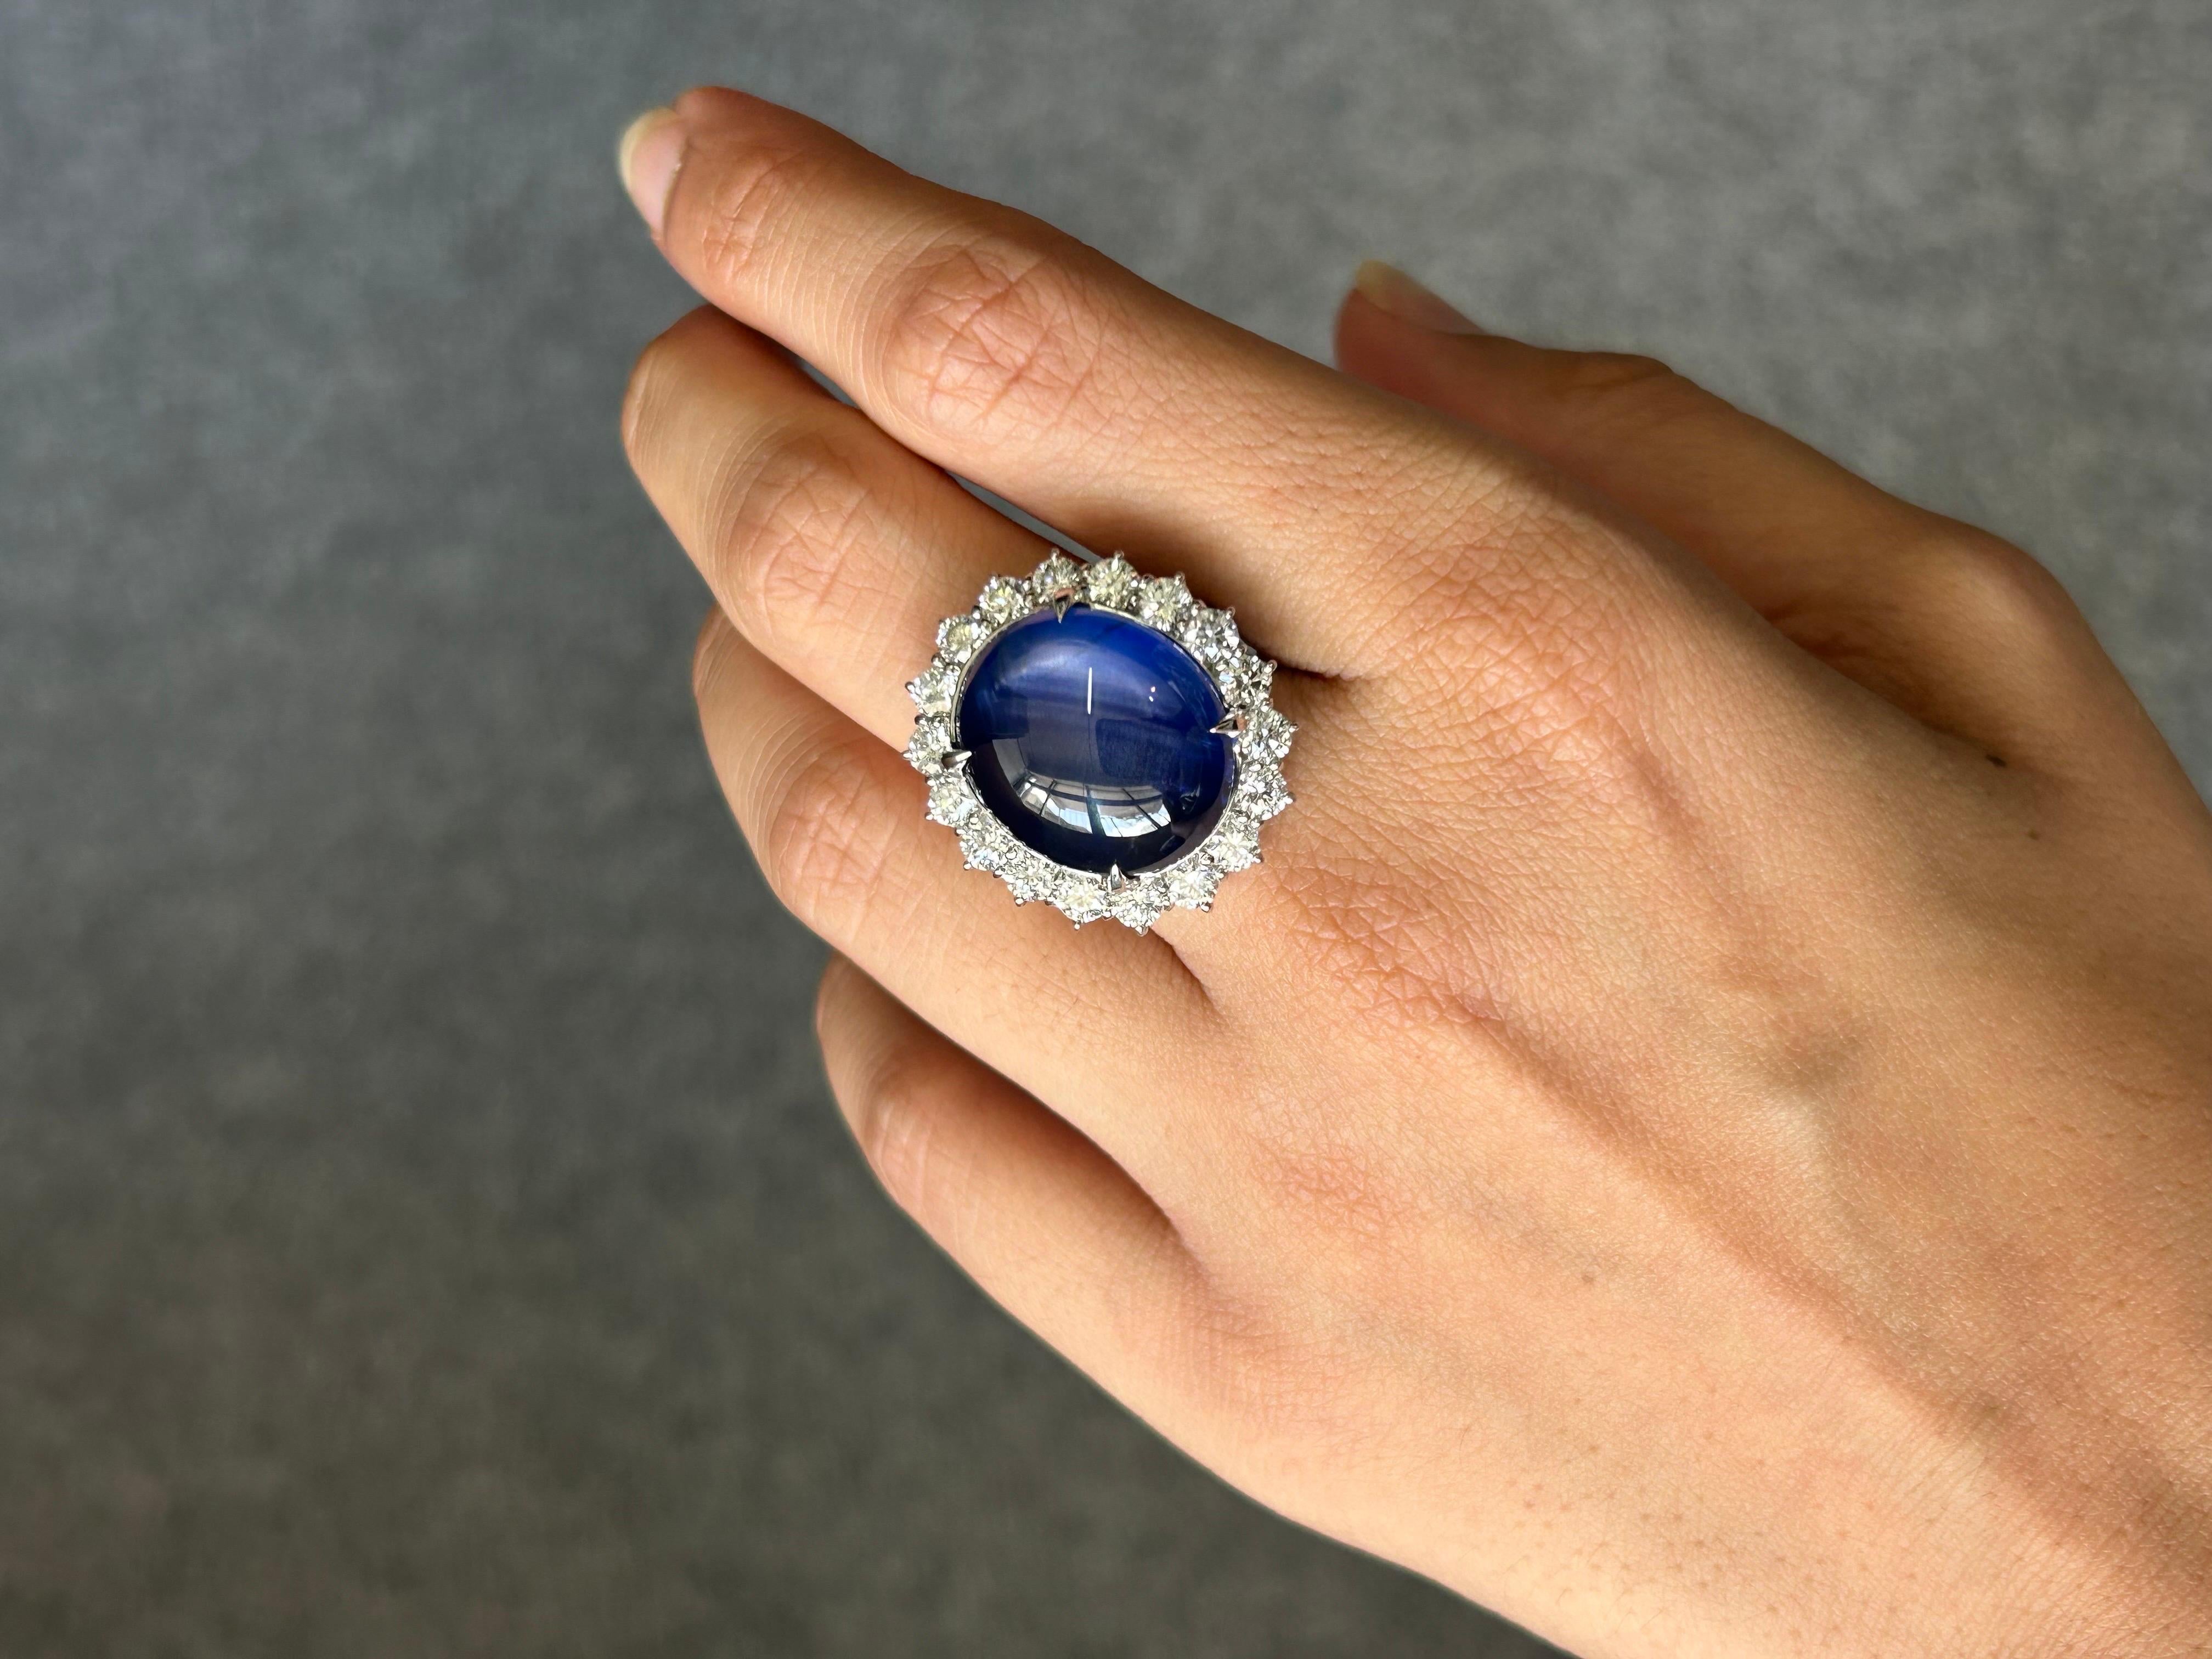 A stunning, one of a kind Burmese no heat Star Sapphire ring, weighing 31.36 carats adorned with 2.3 carats of White Diamonds. The center stone has a beautiful blue color, with a star reflecting off it when under direct light. Currently sized at